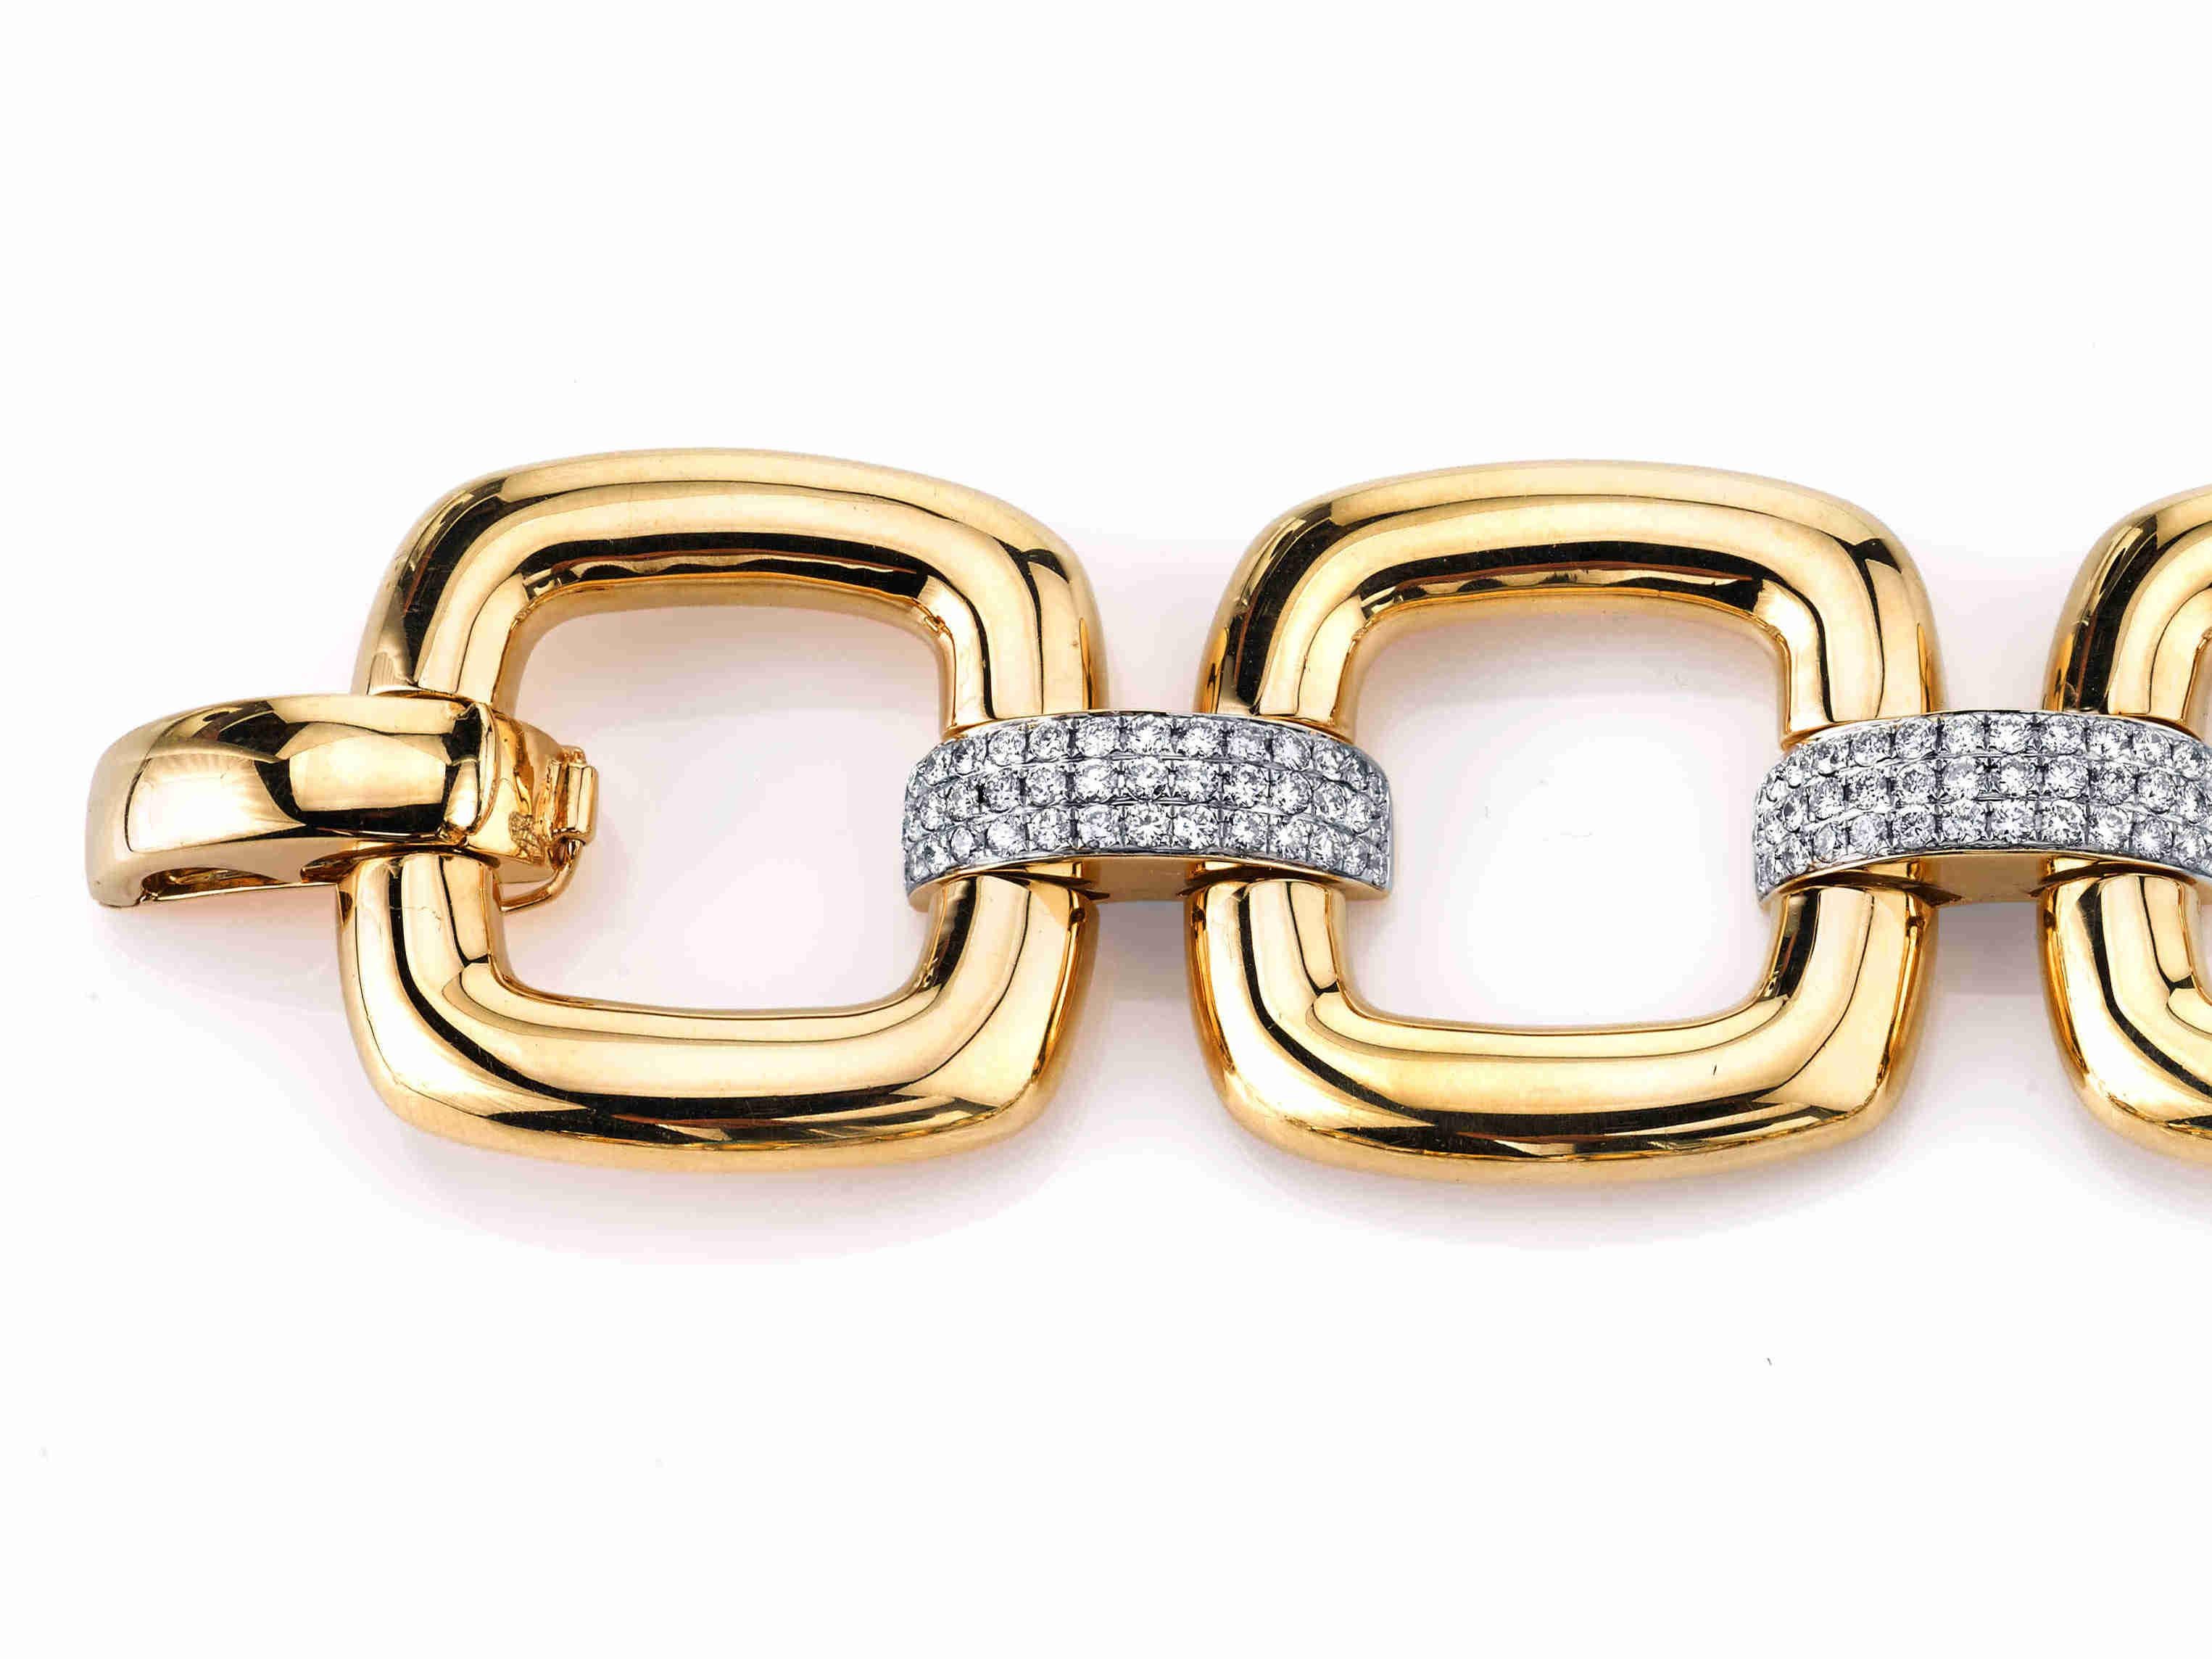 This bold yellow gold and diamond-set link bracelet has a modern retro-chic vibe. It is a statement piece that won't go unnoticed and it easily transitions from day wear to evening attire. The oversized 18k high-polished links are eye-catching by